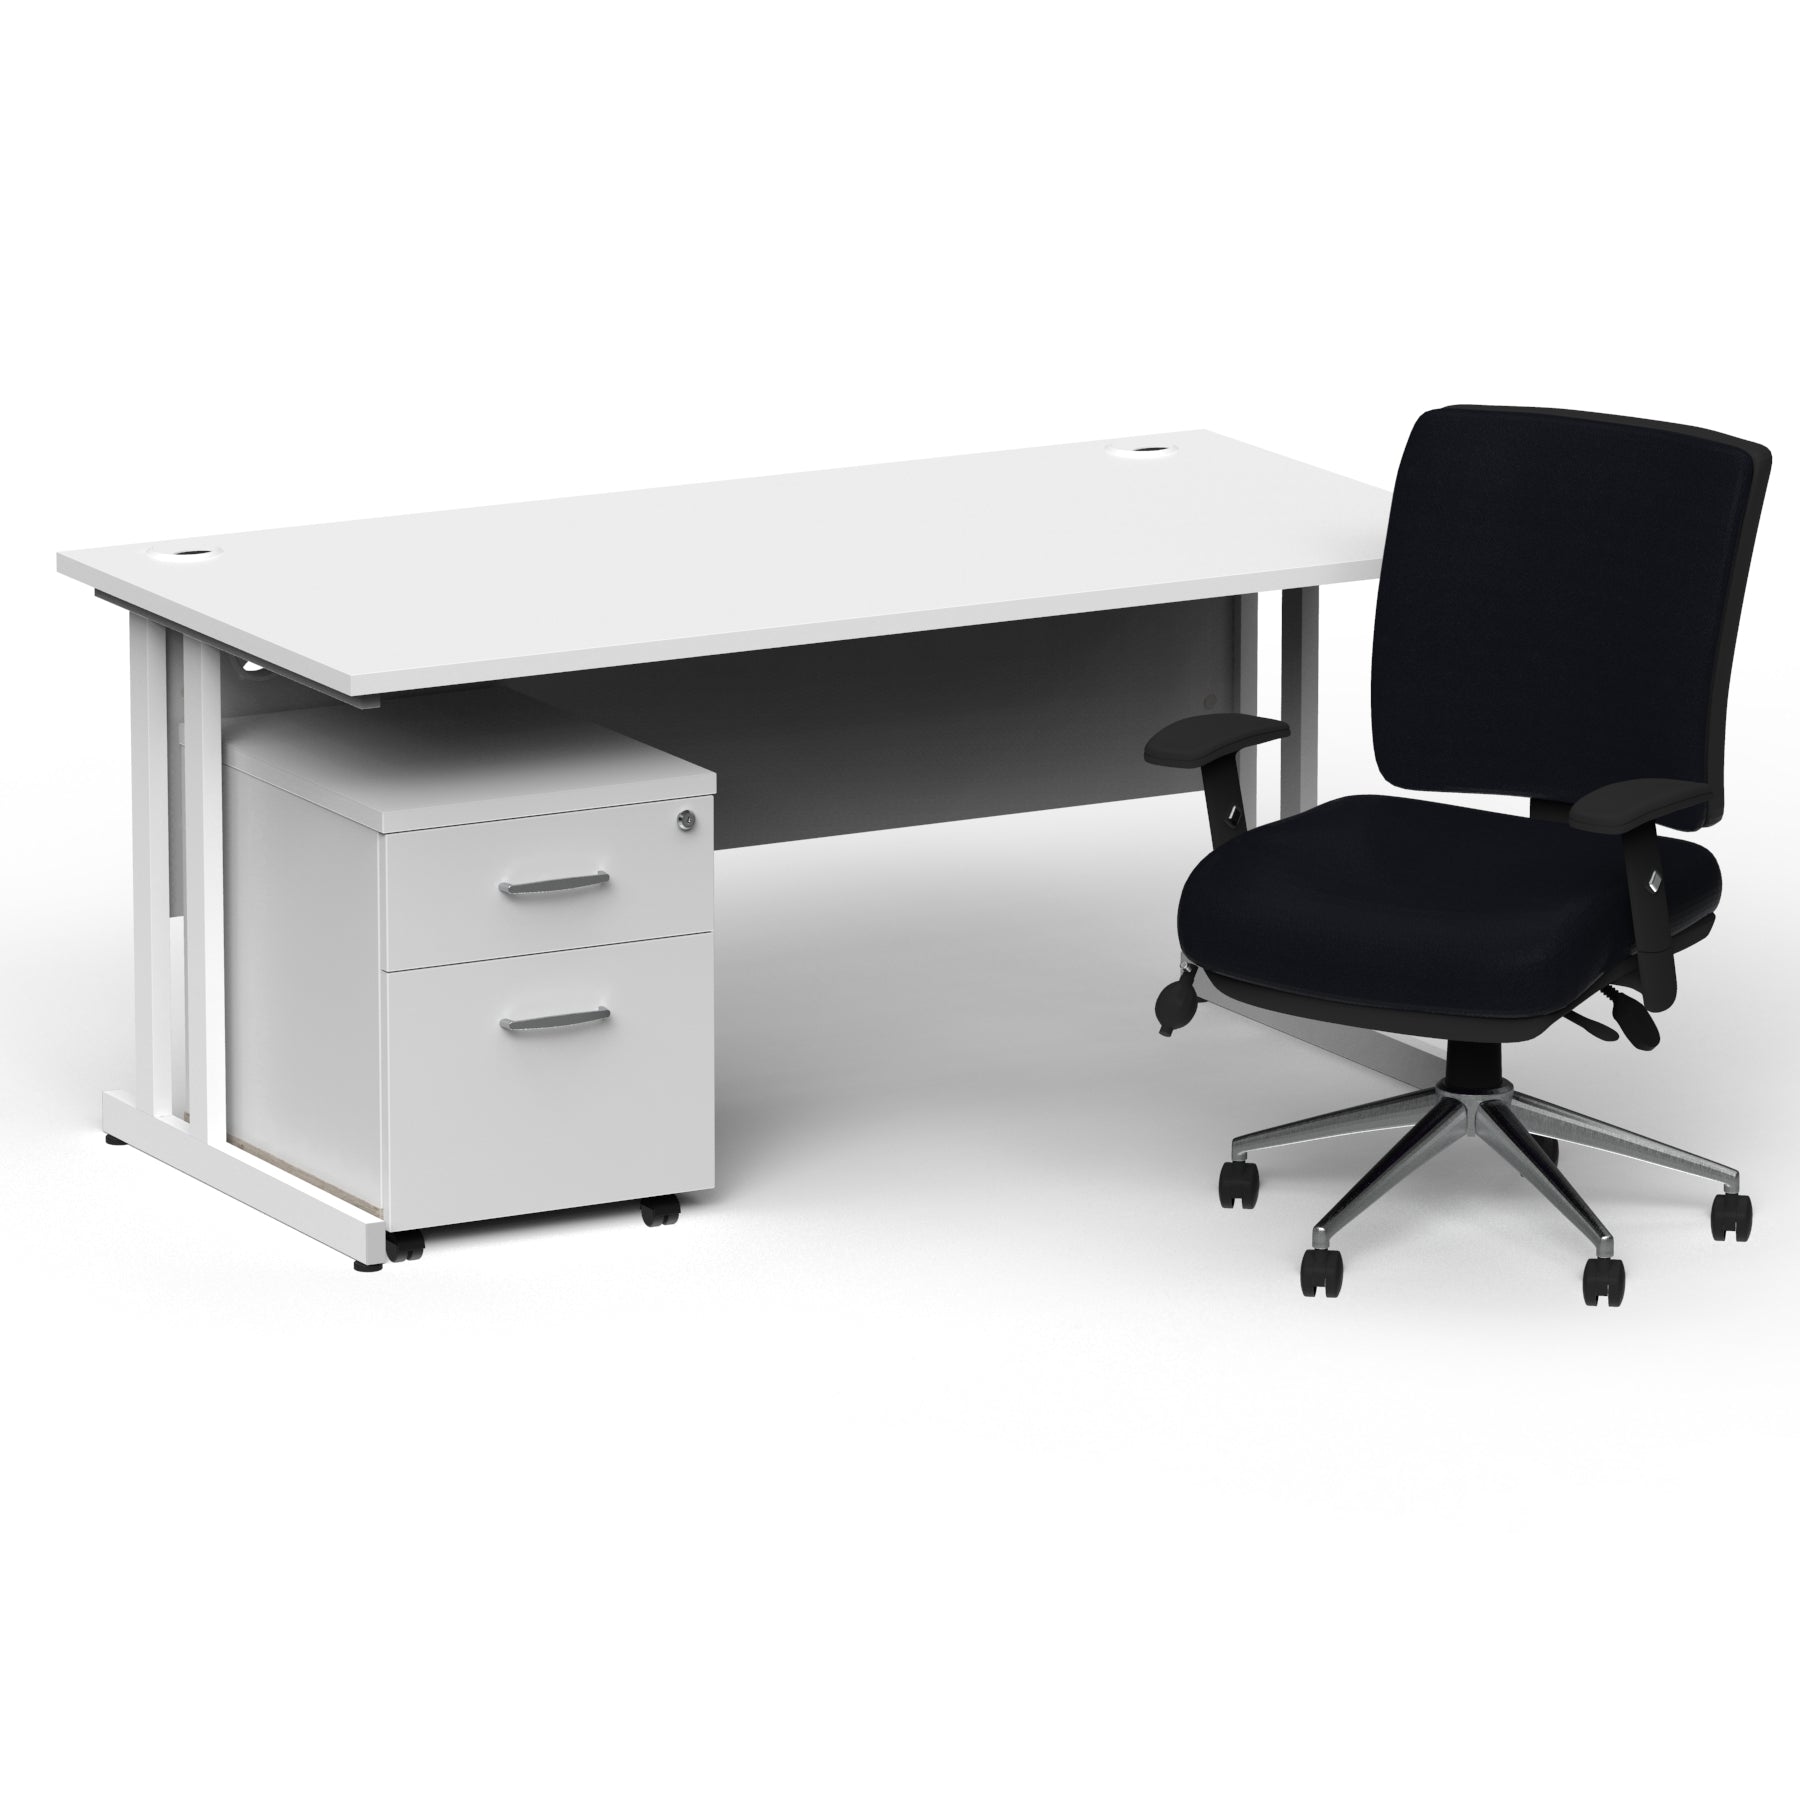 Impulse 1600mm Cantilever Straight Desk With Mobile Pedestal and Chiro Medium Back Black Operator Chair